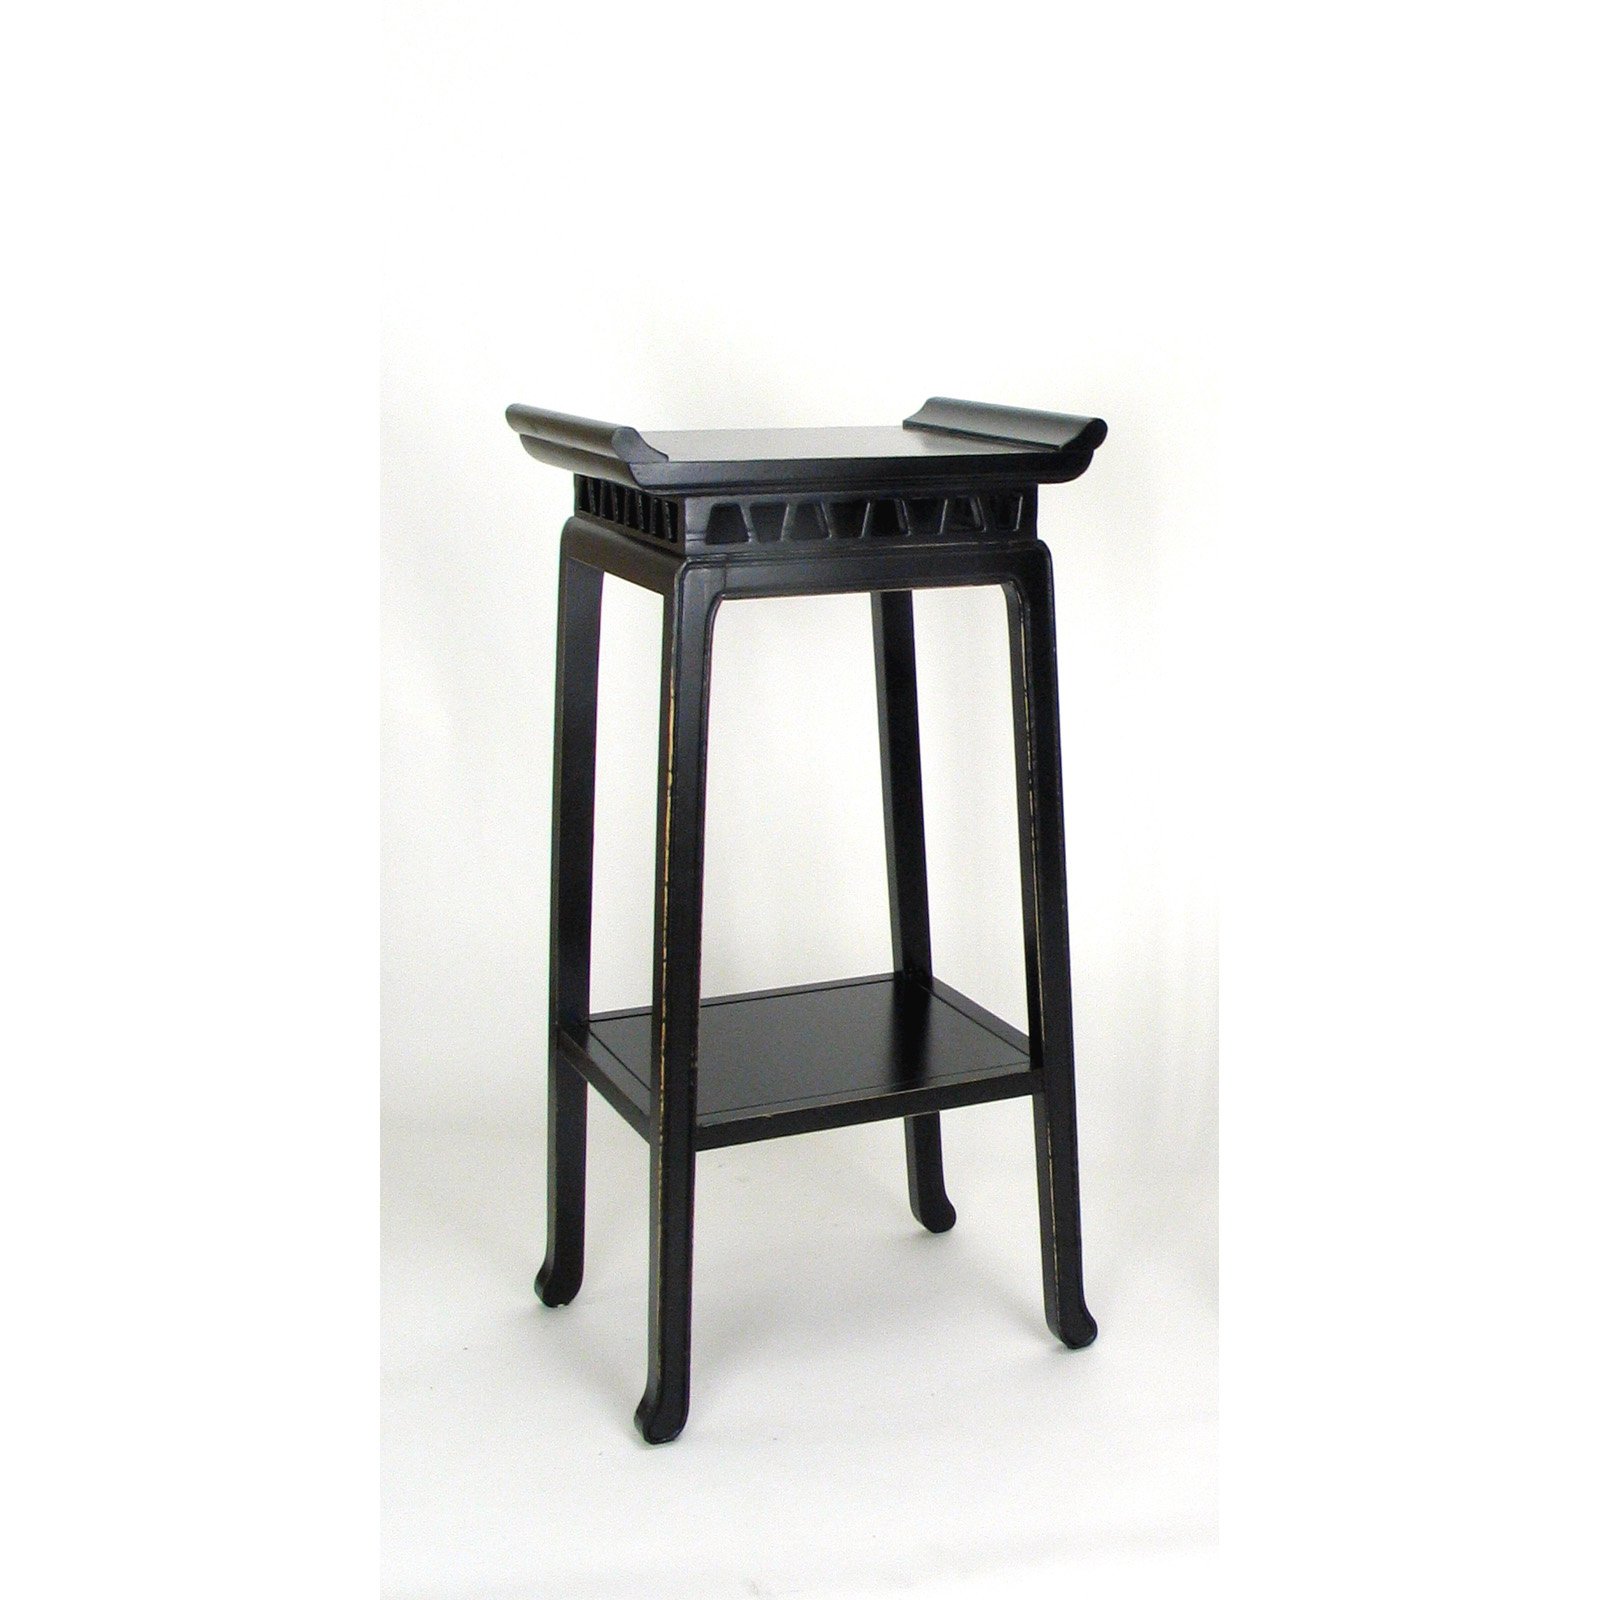 Wayborn Chow Plant Stand in Antique Black - image 2 of 2